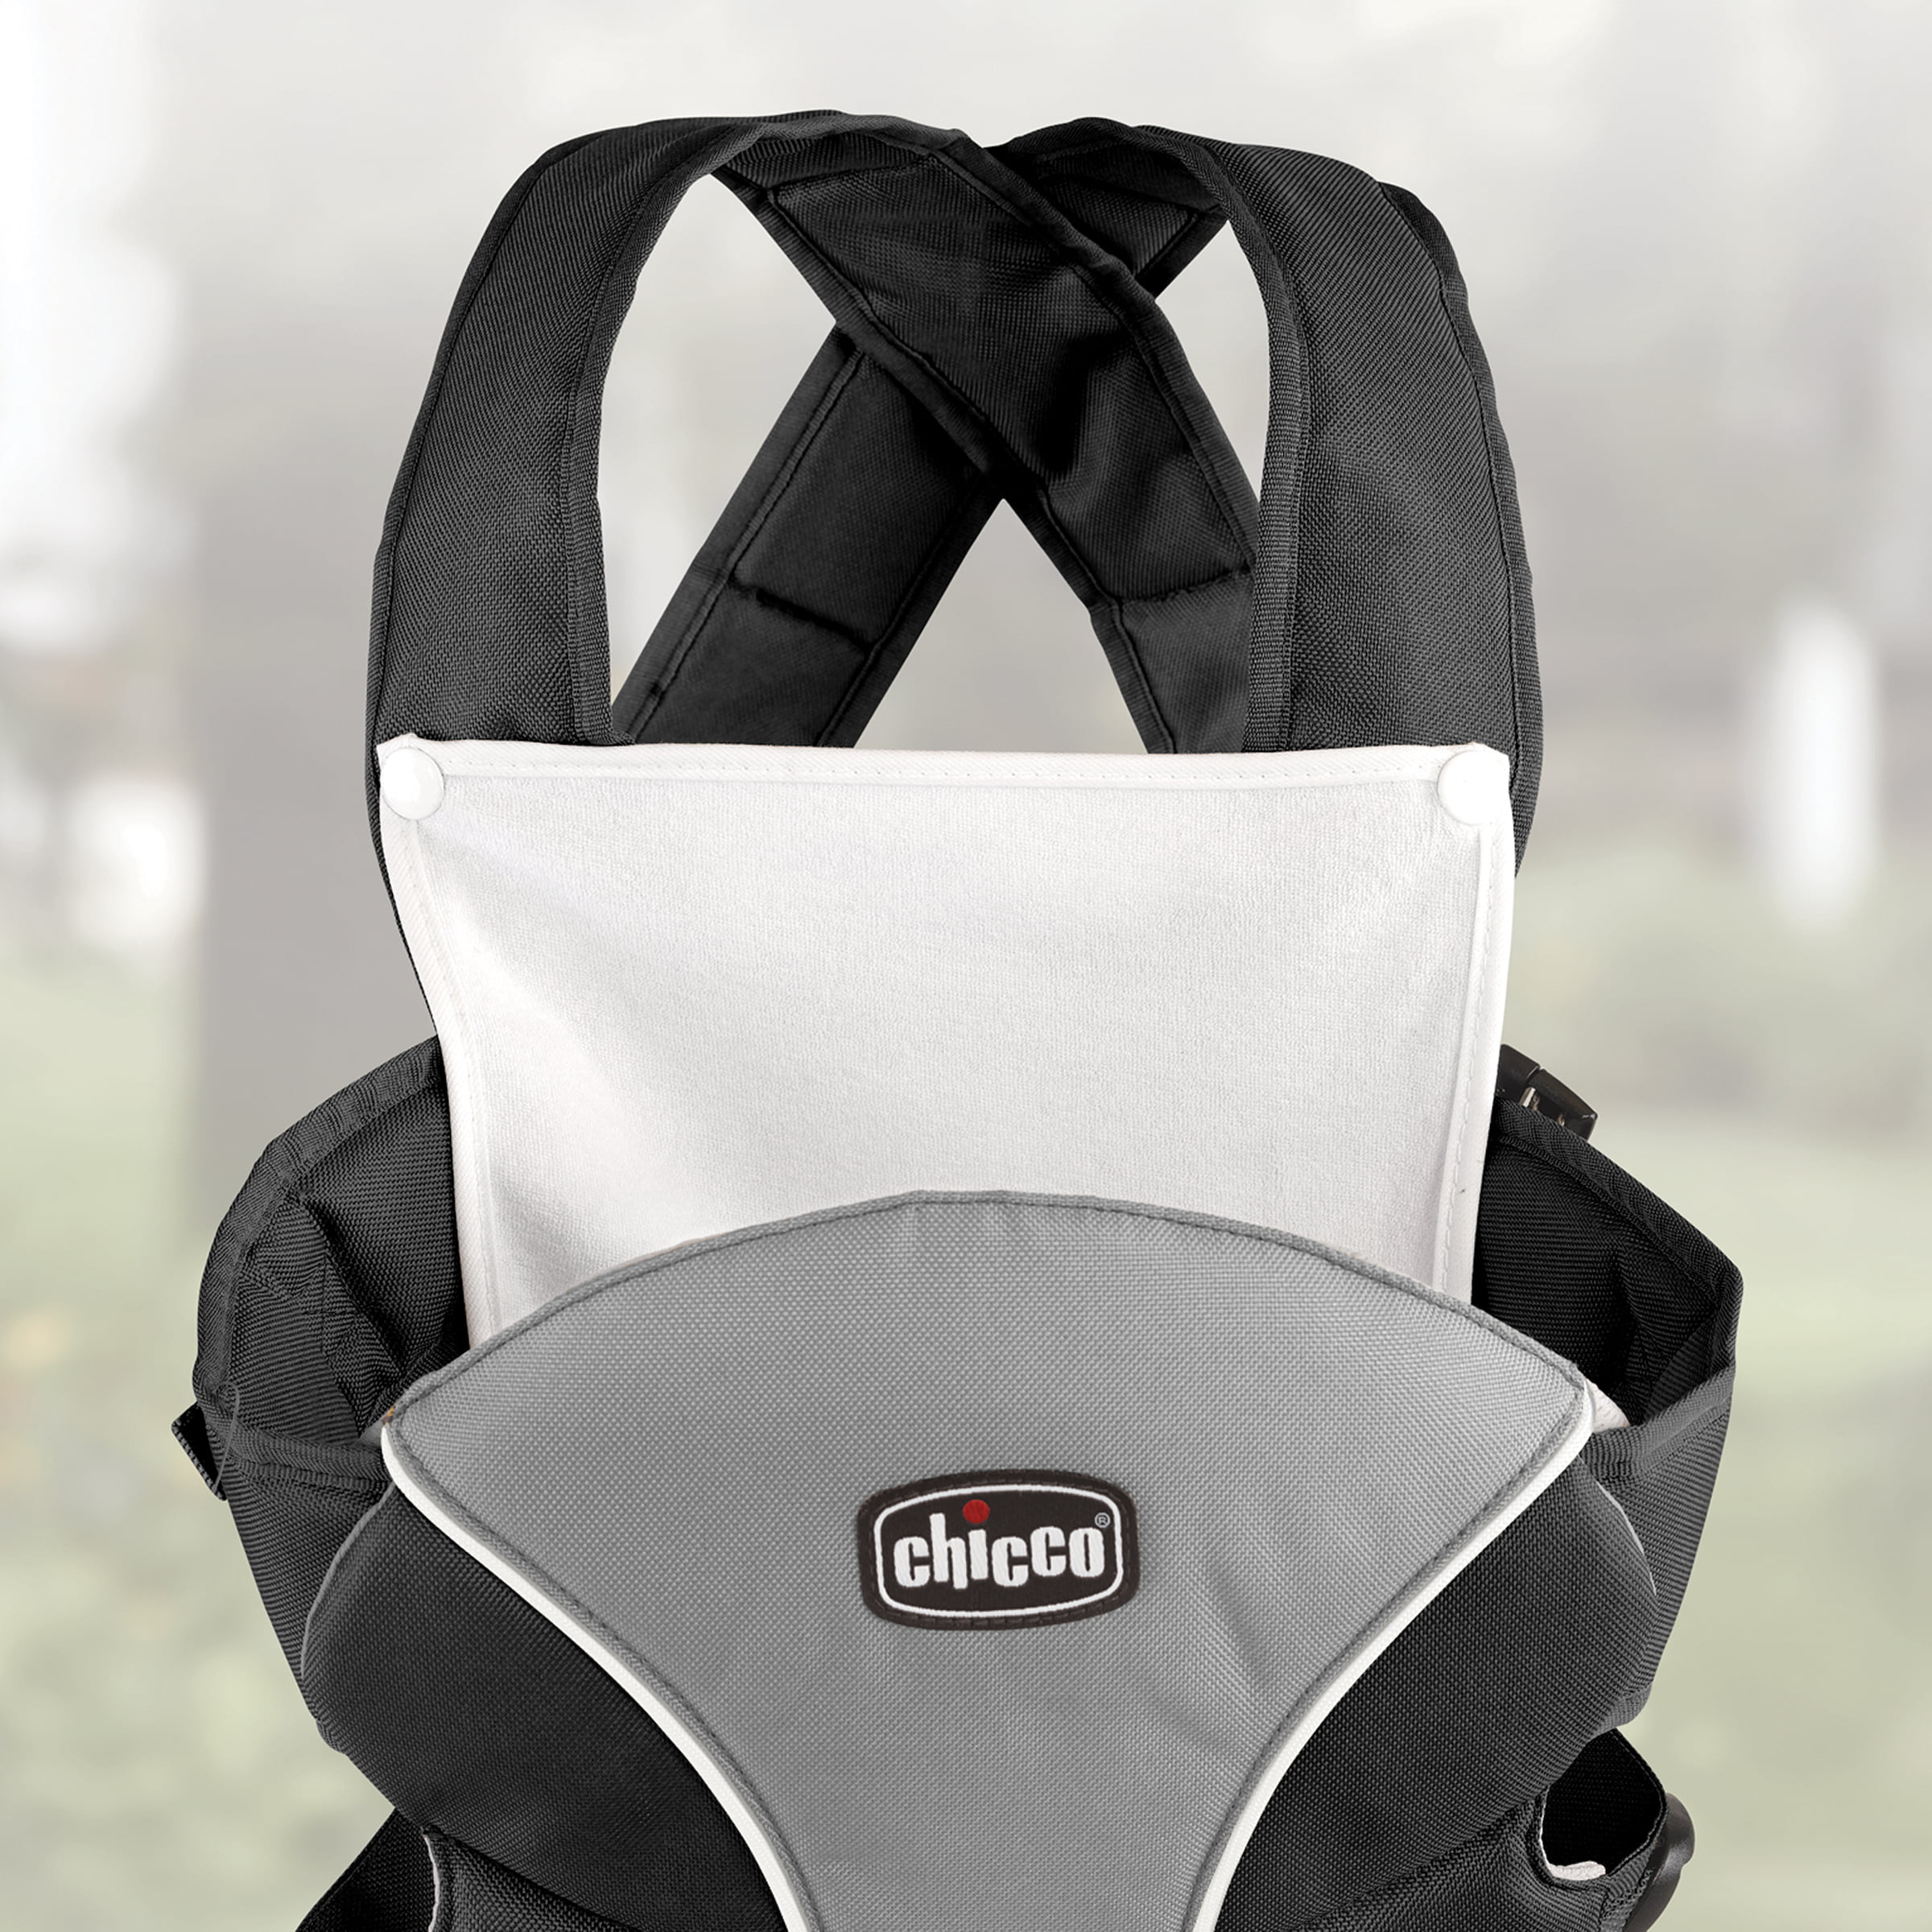 chicco 2 way baby carrier